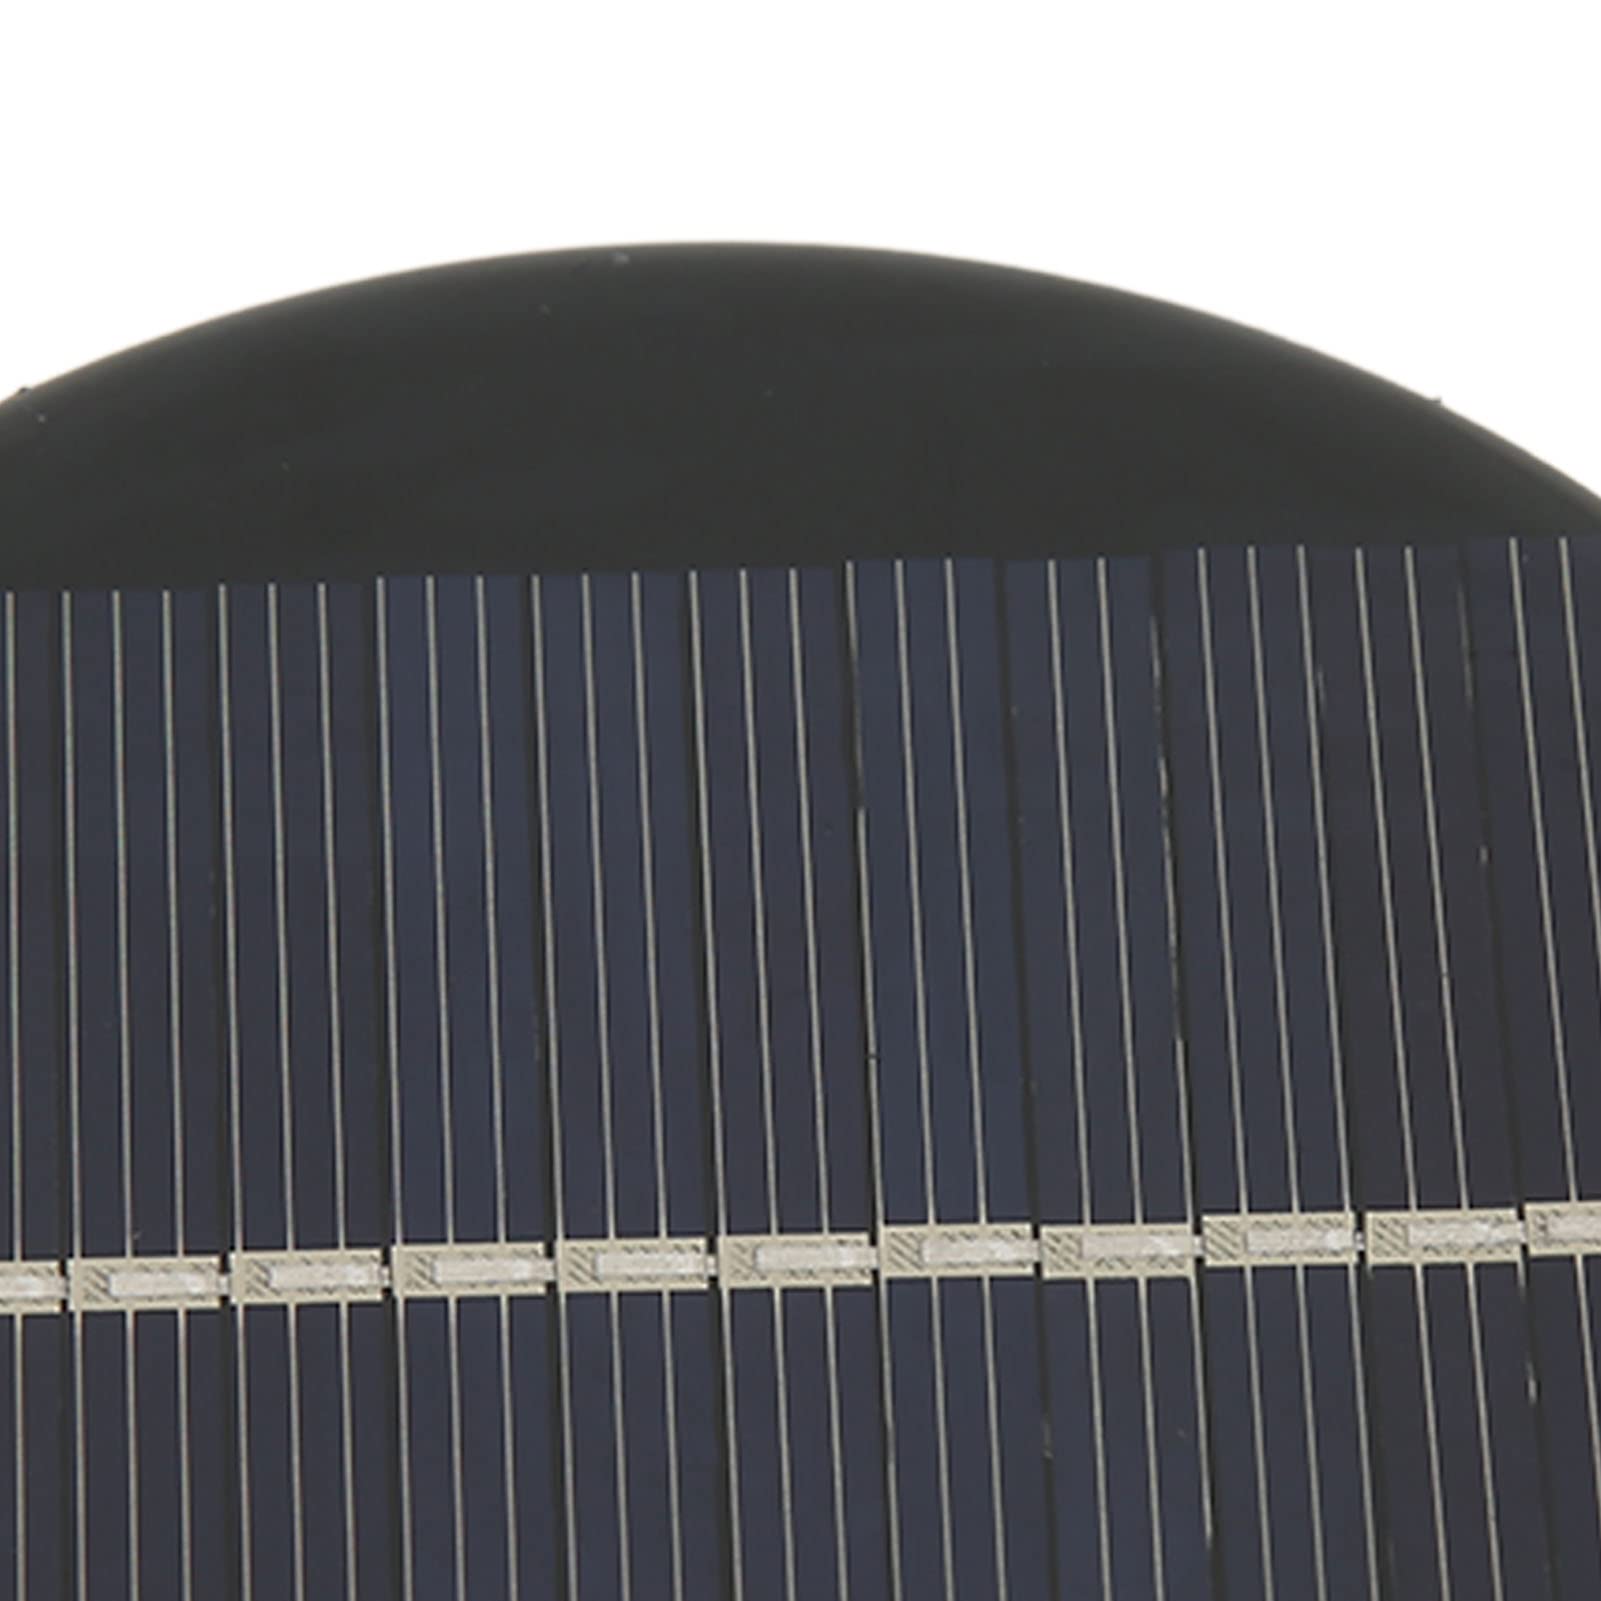 Solar Panel, 0.5W high Conversion Rate Waterproof Circular Solar Panel for House Outdoor use